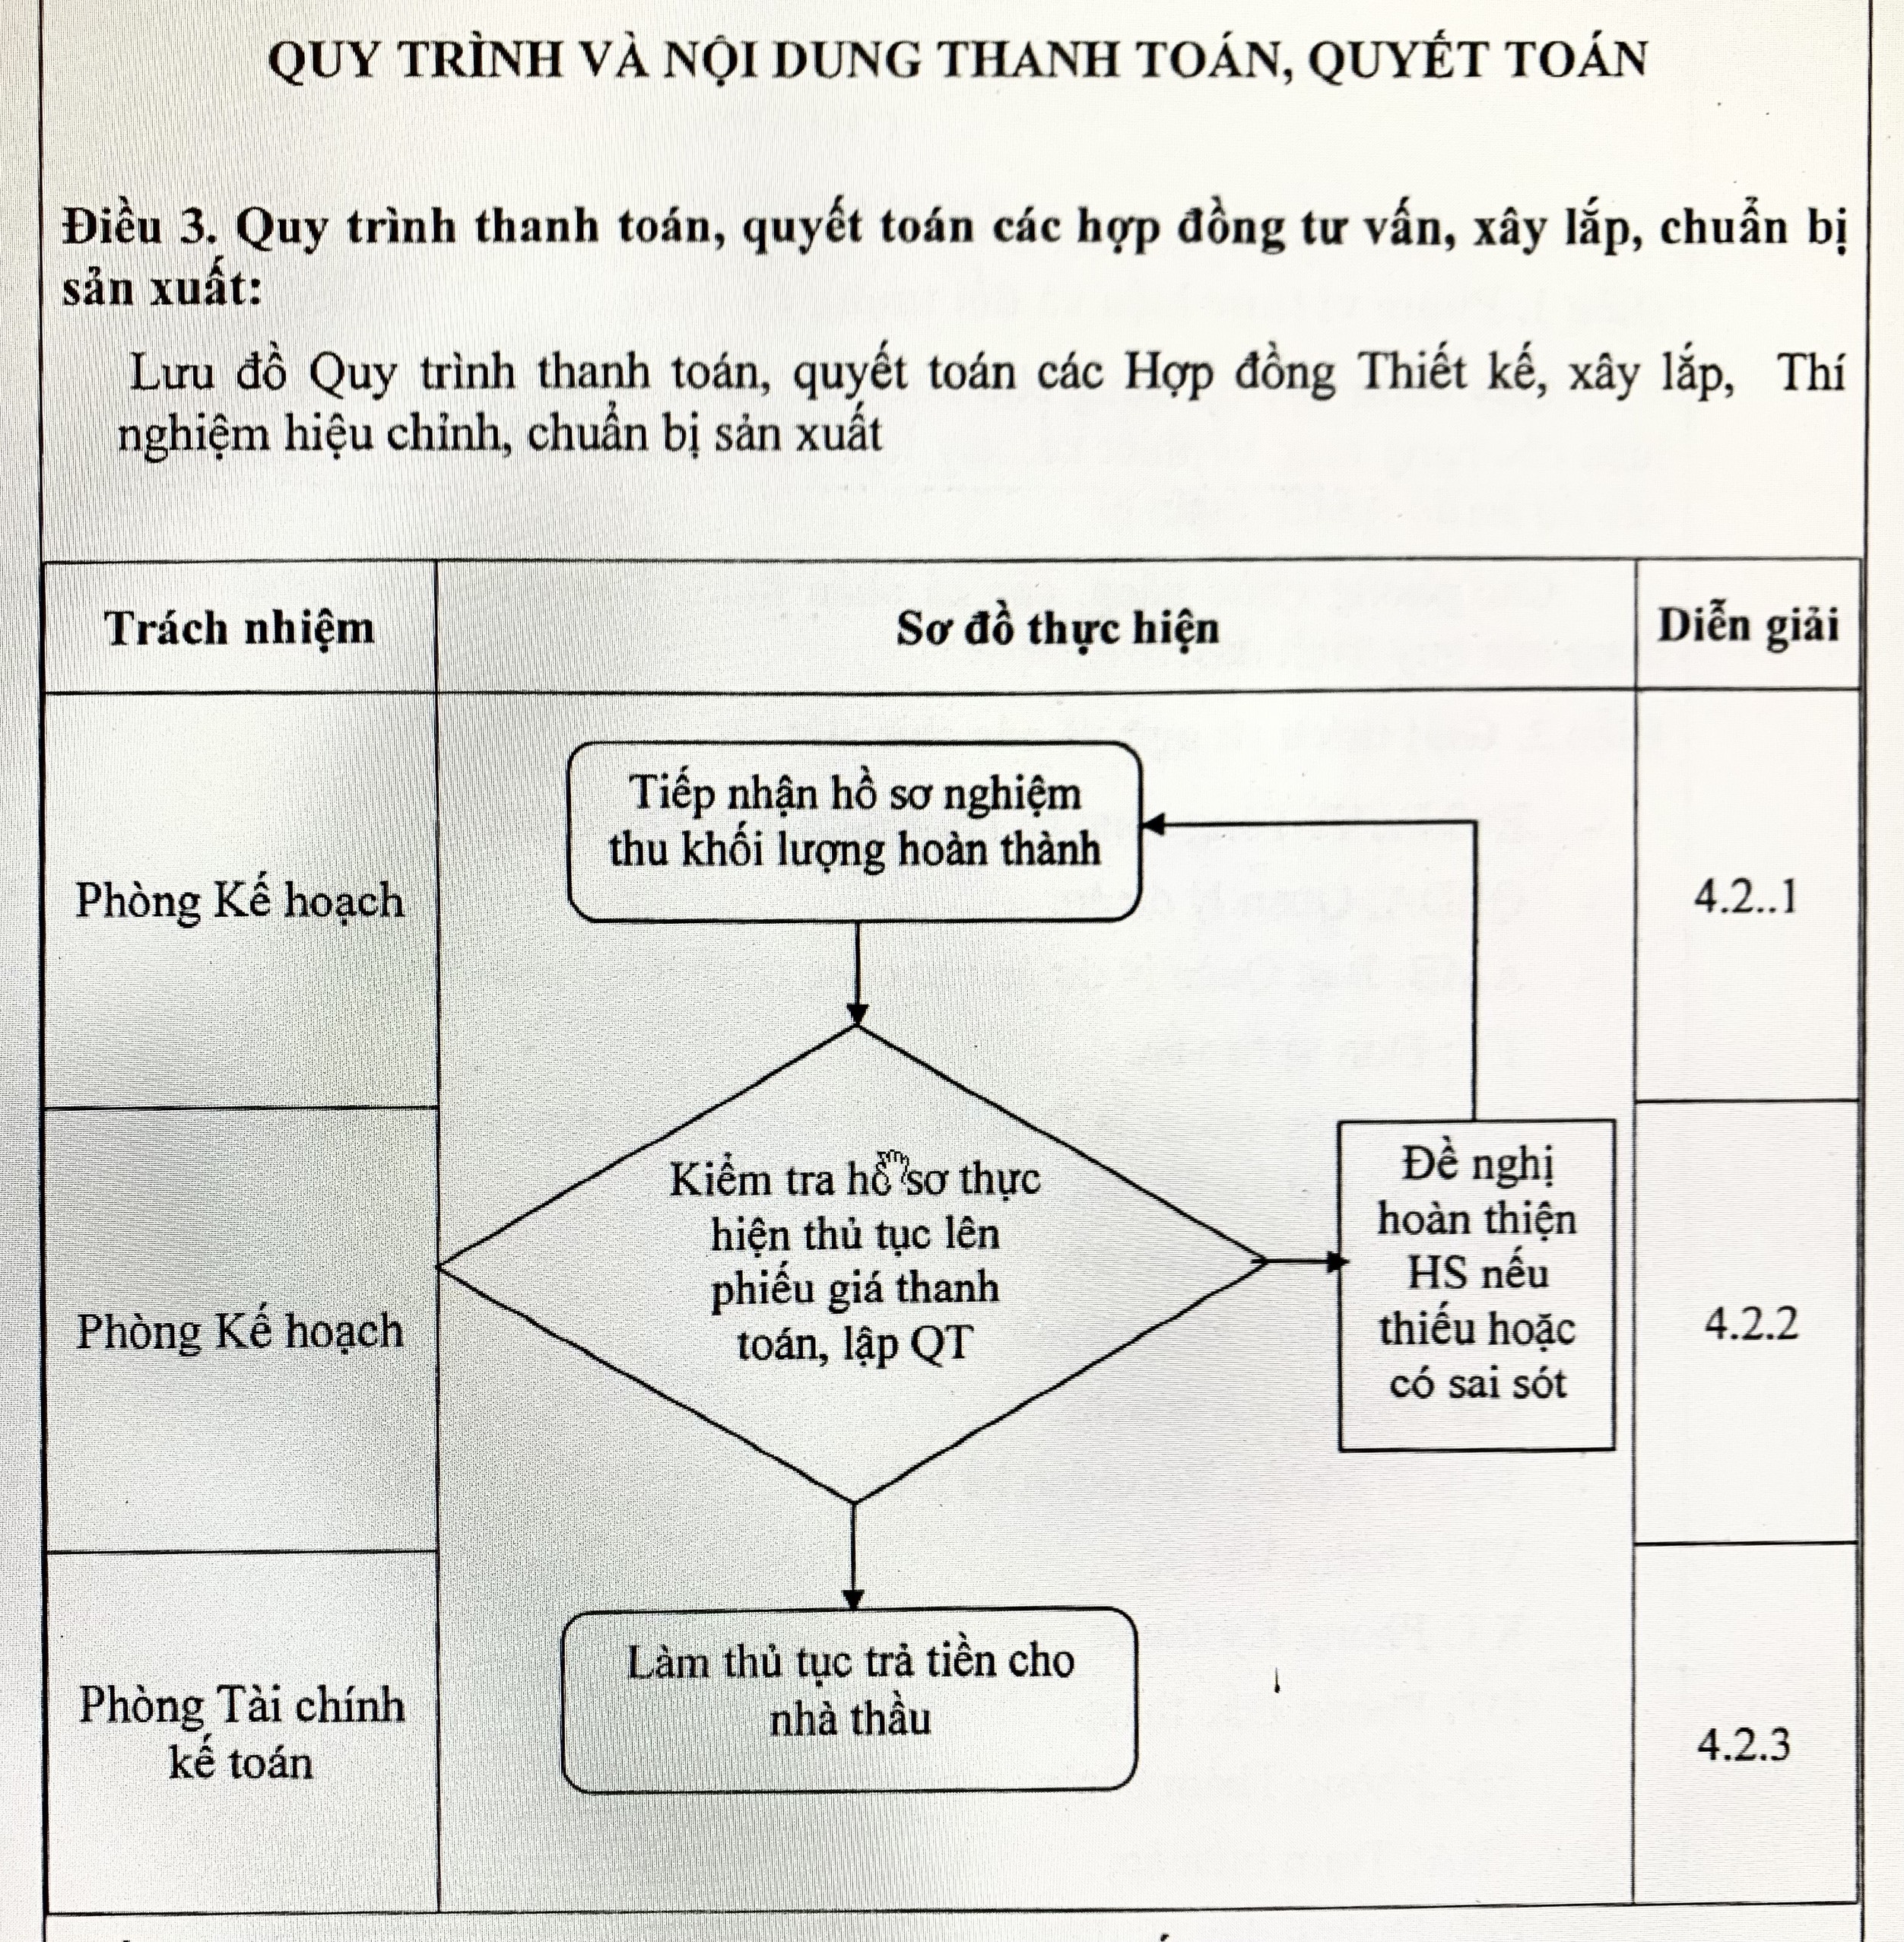 quy-trinh-thanh-quyet-toan